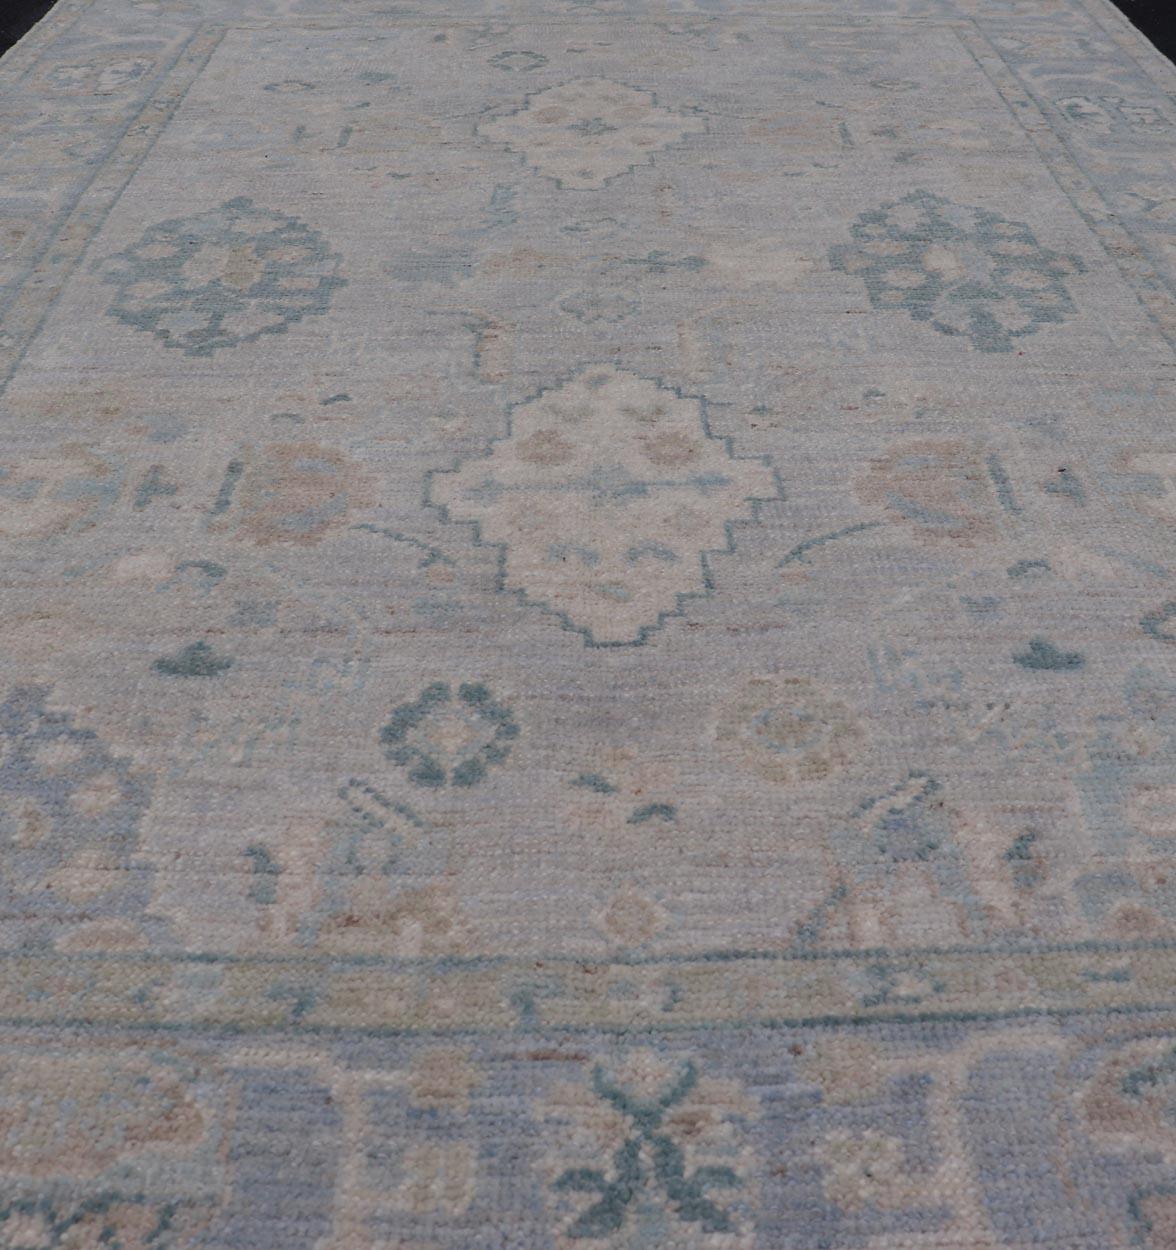 Hand-Knotted Oushak with a Light Blue-Gray Background and Tribal Motifs. Keivan Woven Arts; rug AWR-16951 Country of Origin: Afghanistan Type: Oushak Design: Floral, All-Over Abstract-Tribal. 
Measures: 3'10 x 6'0 
This Oushak presents centered